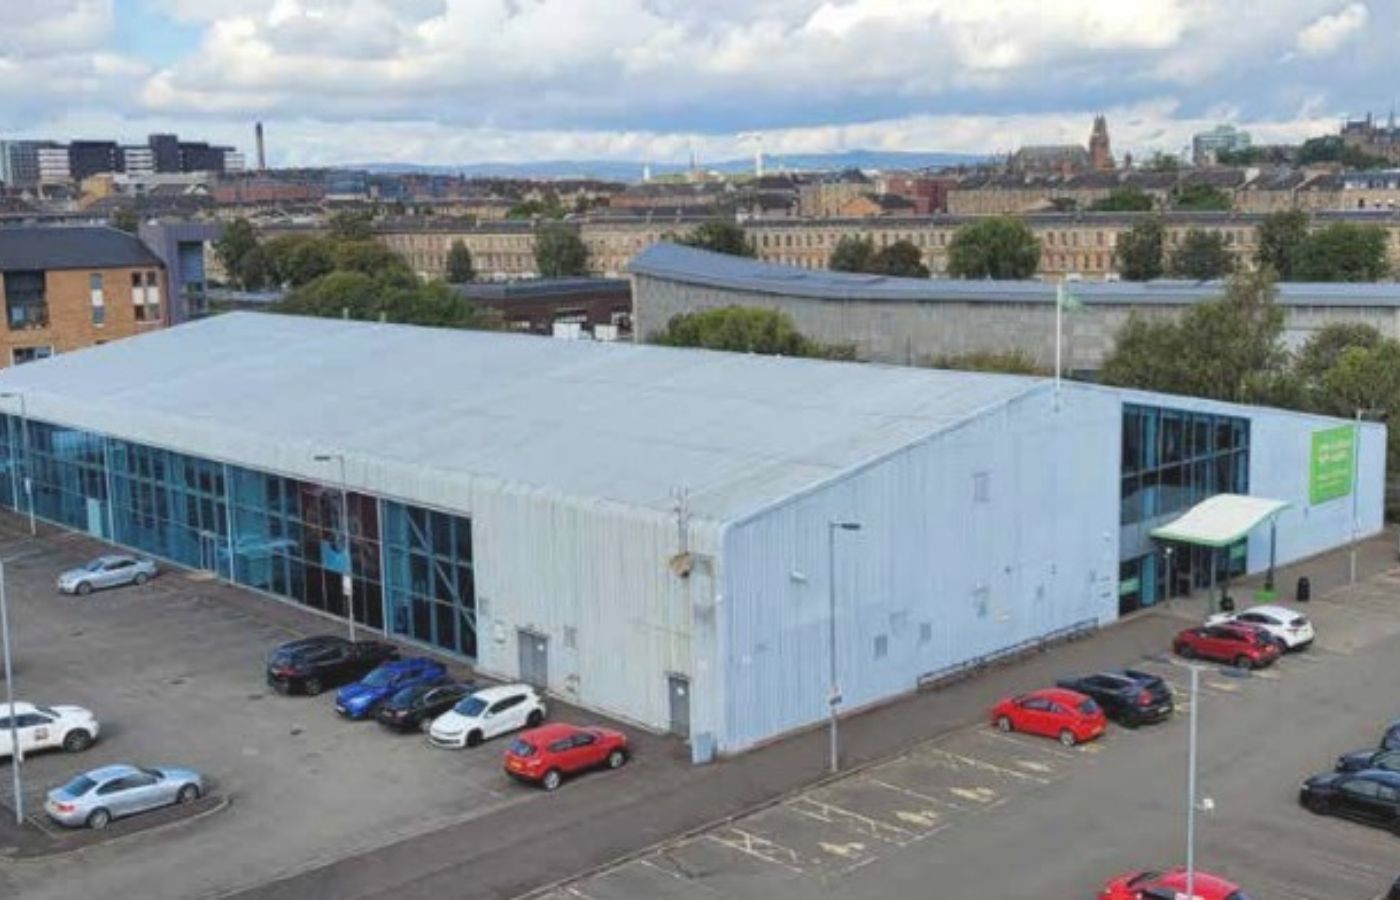 A new bid to build flats on the site of the Nuffield Health gym in Finnieston has been submitted to the council.